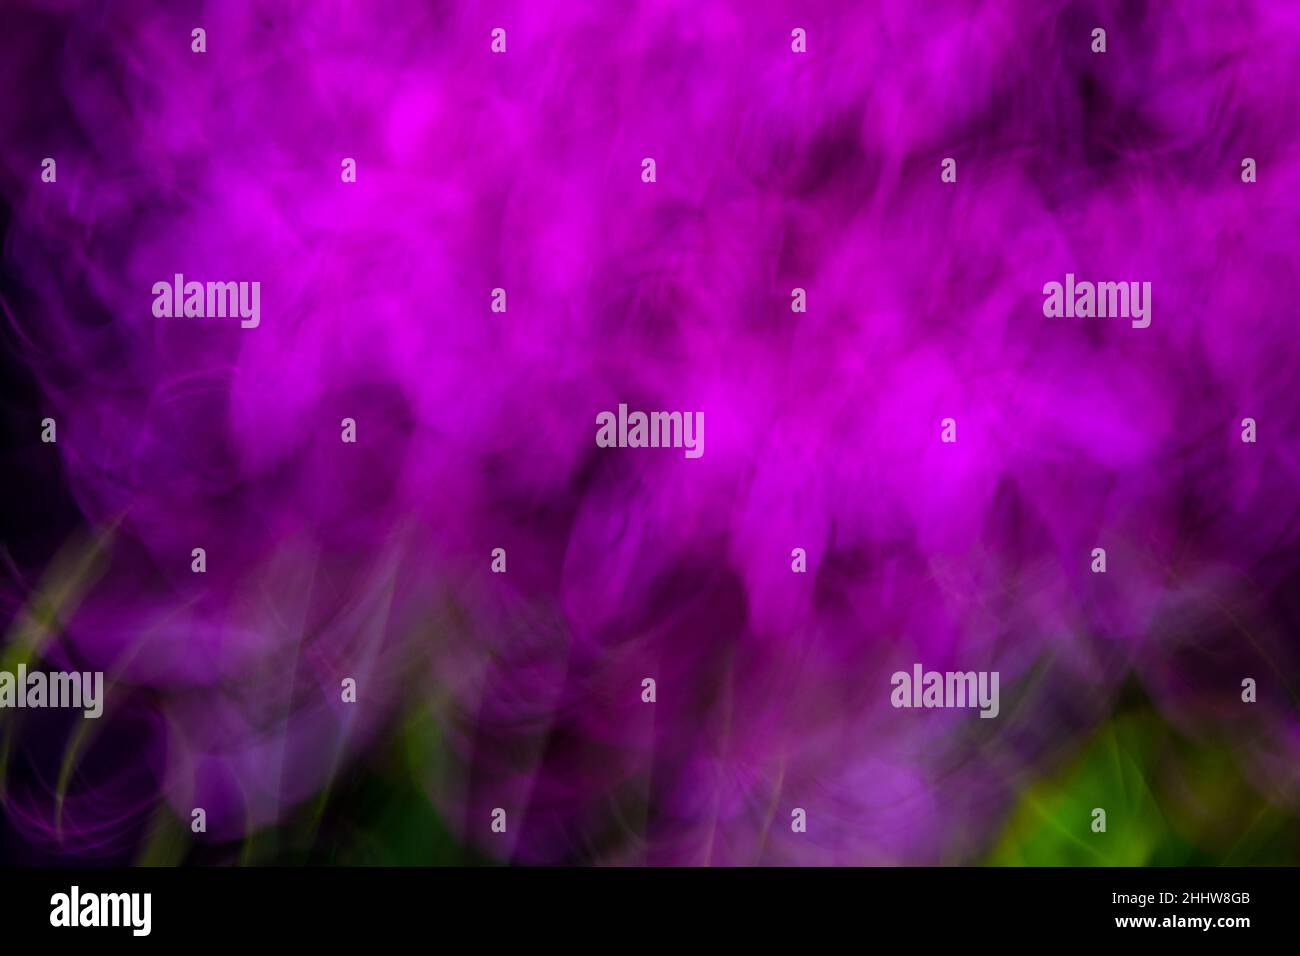 Purple flowers are blurred and warped in an abstract pattern Stock Photo